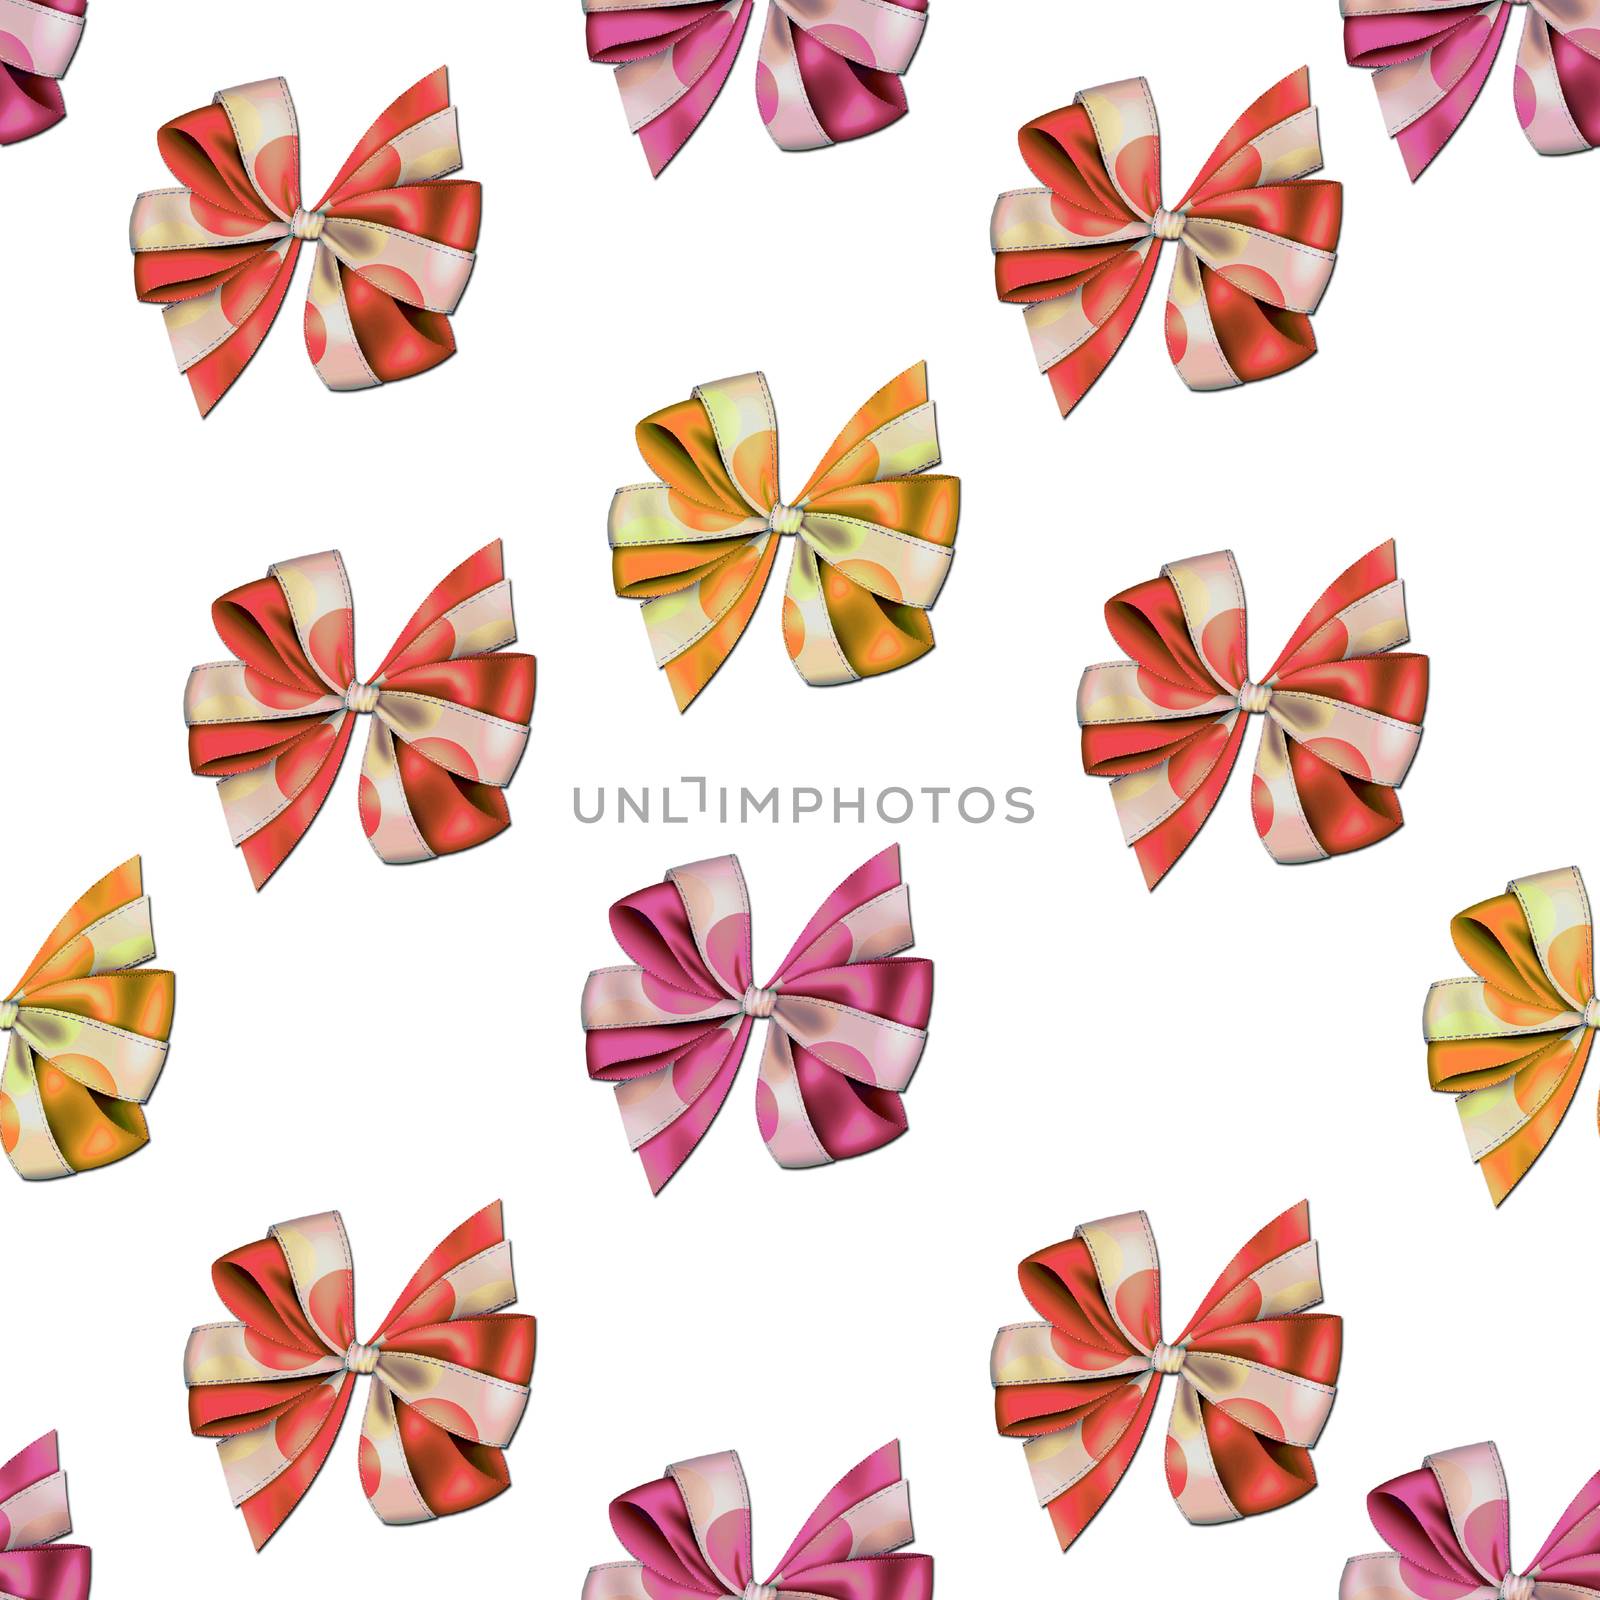 All over background Seamless pattern - Little cute bows and ribbons in vivid and bright colors on a White background by GGillustrations